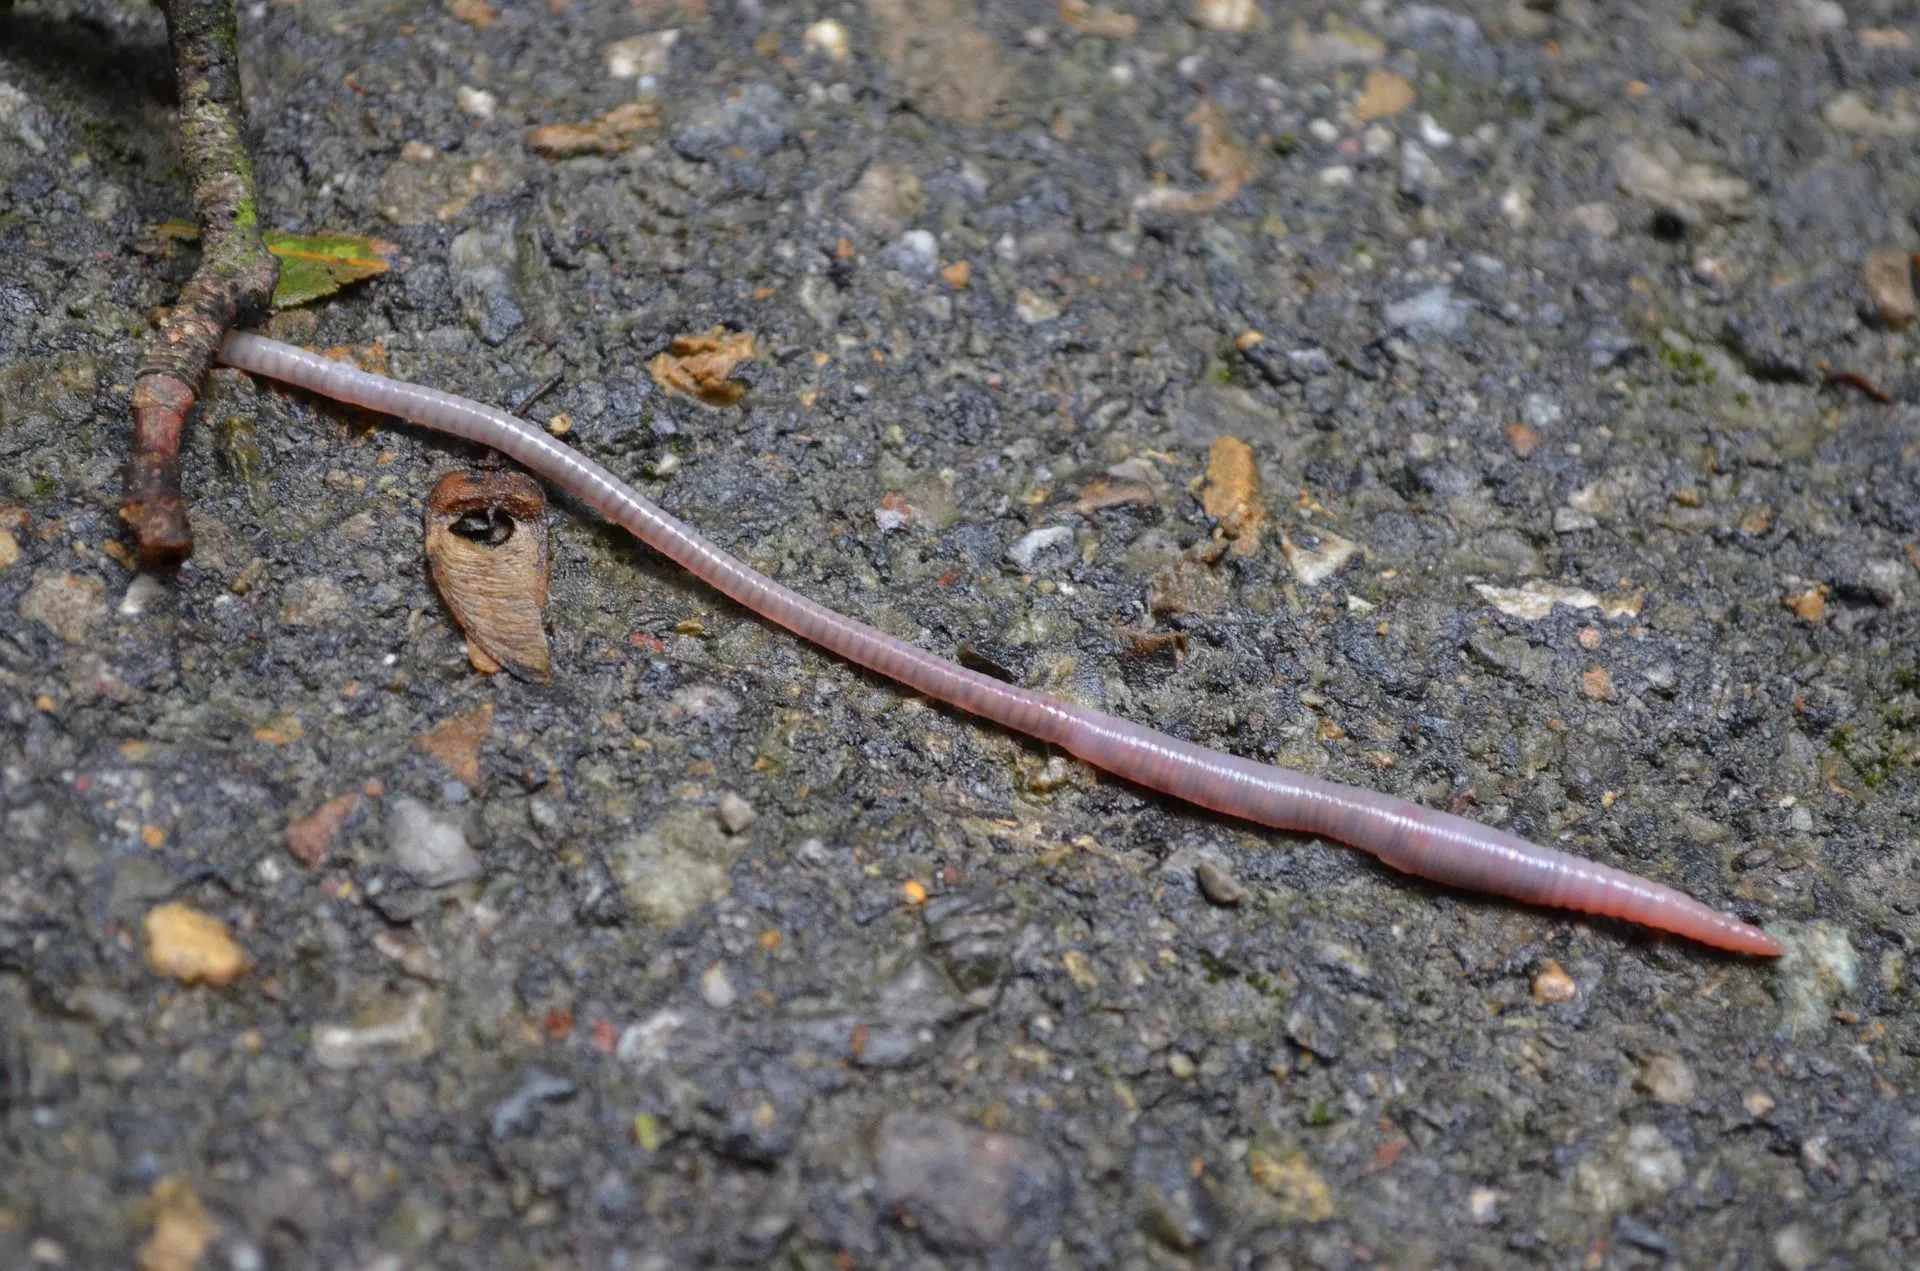 Worms may consume their own weight in a single day.